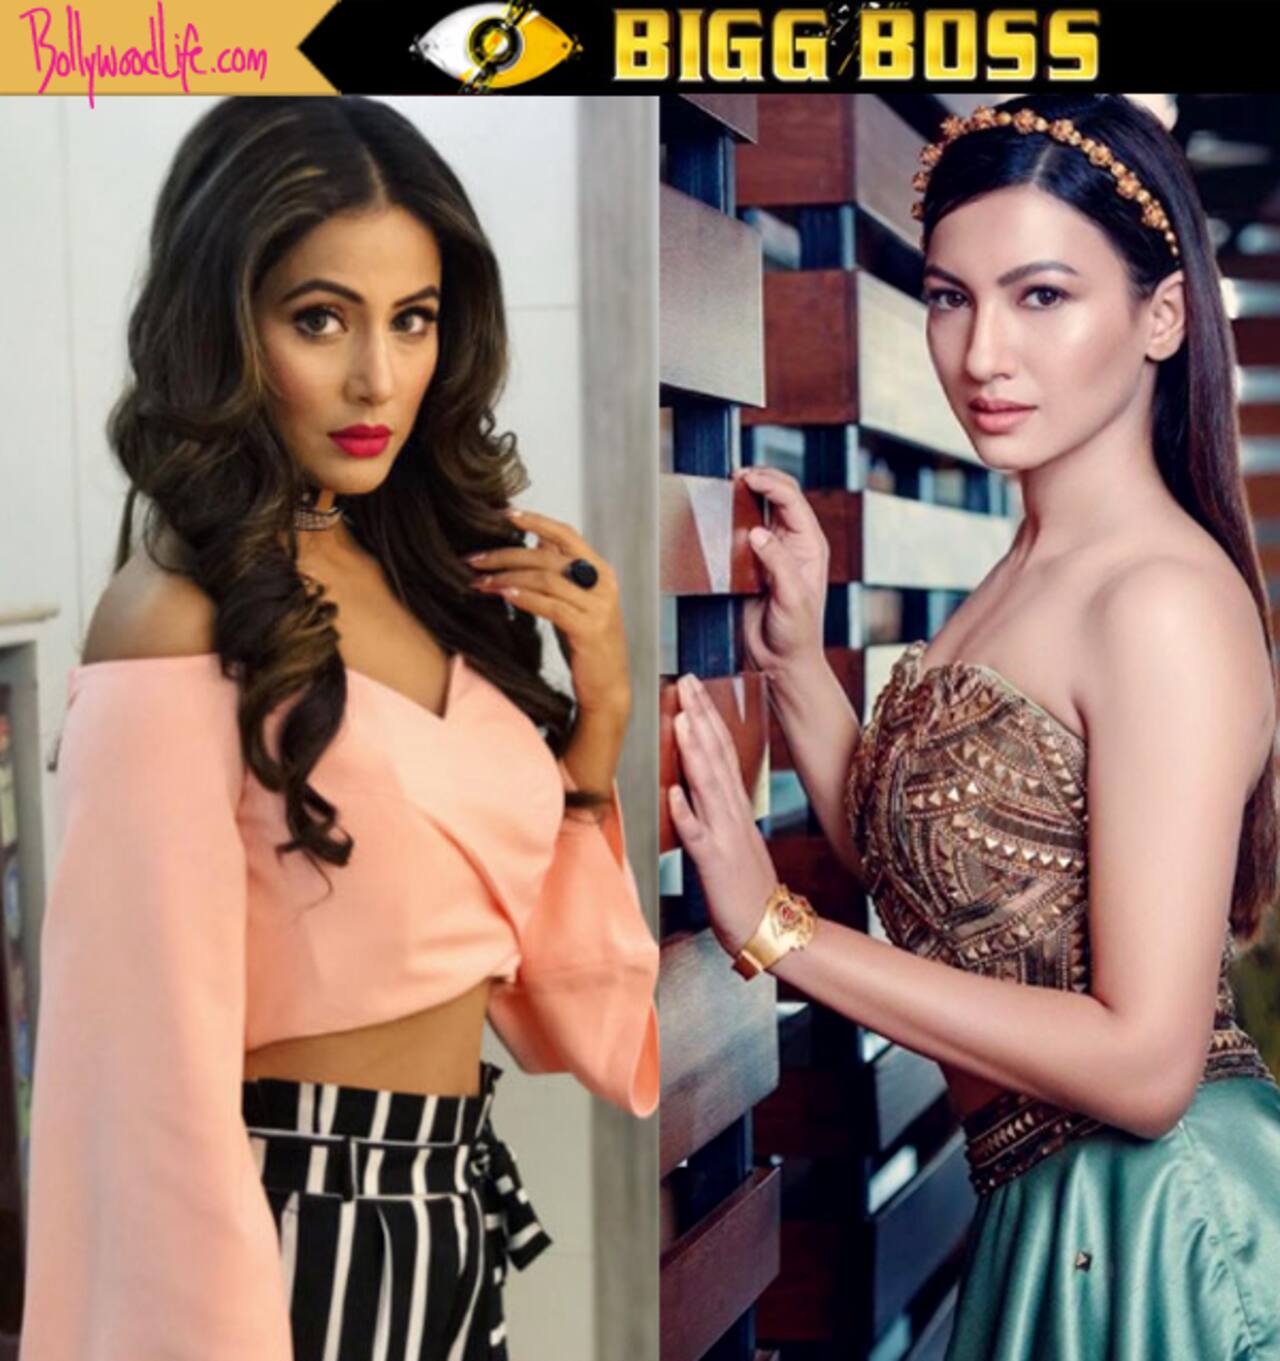 Bigg Boss 11: Did Gauahar Khan just take a dig at Hina Khan's selective outrage on a girl's modesty